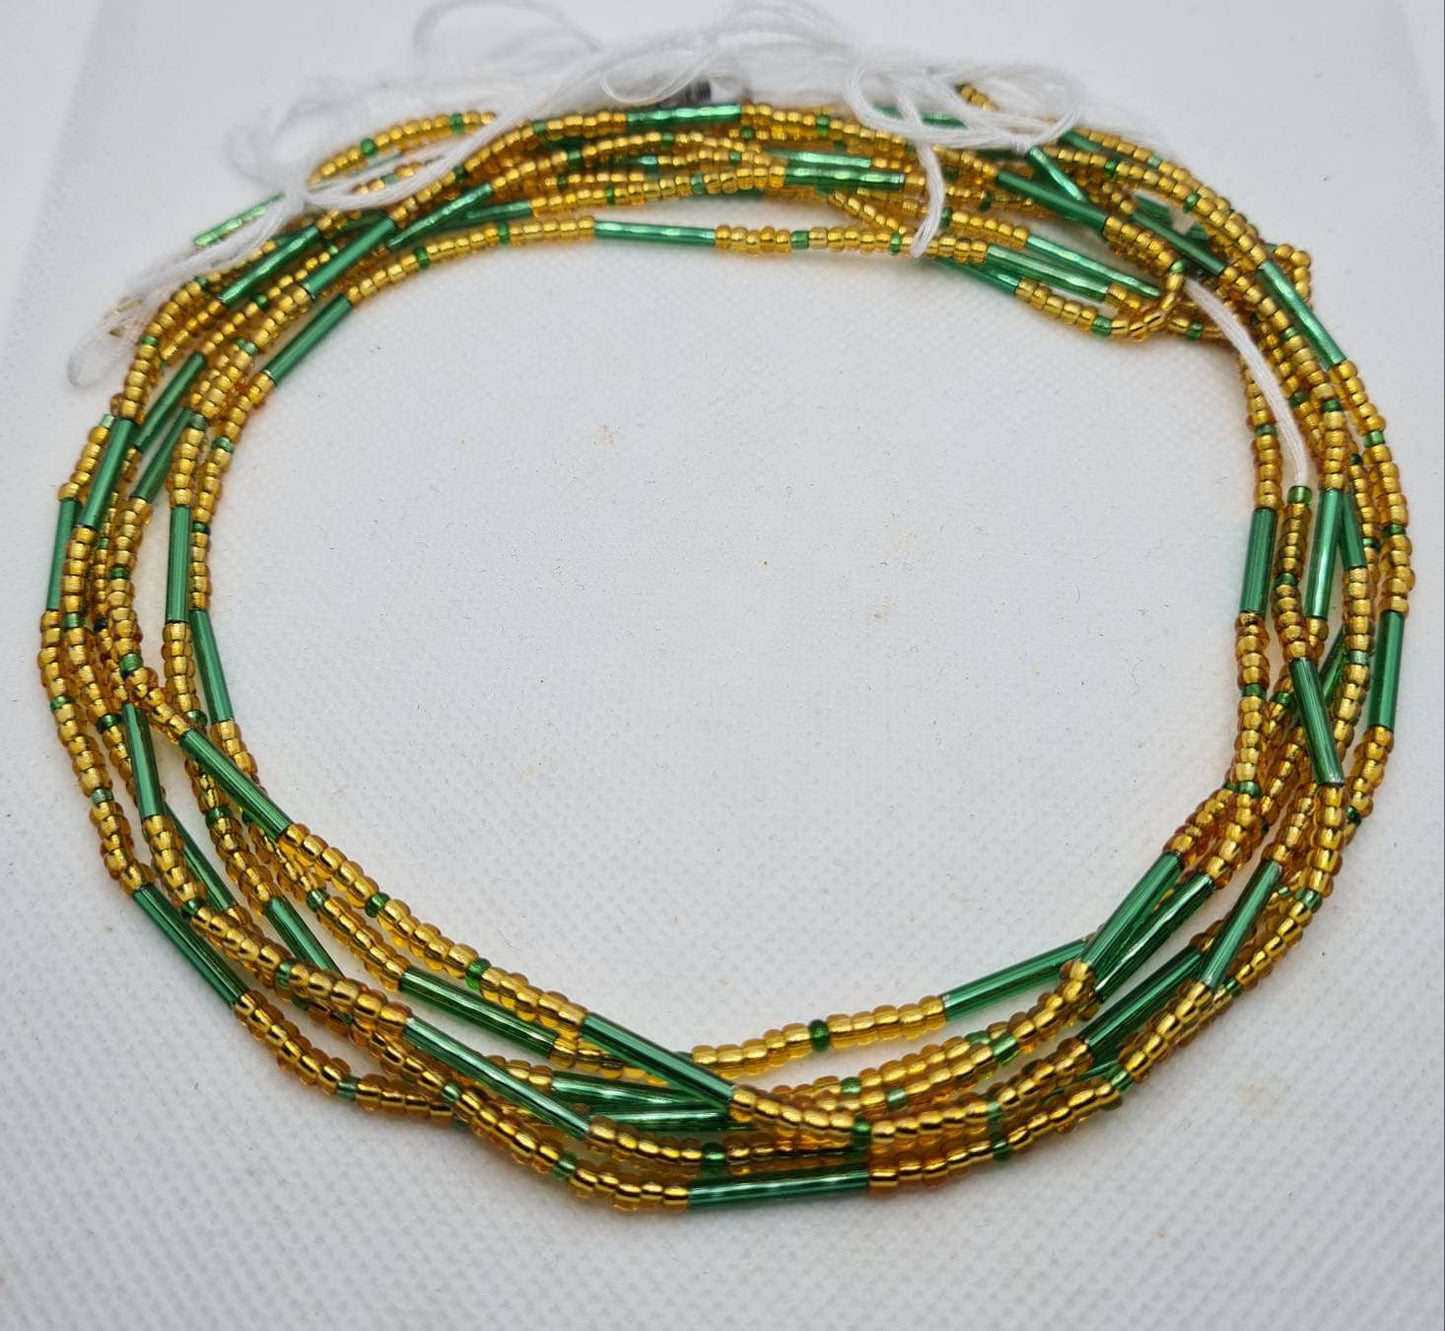 Green and Gold Waist Beads|On Sale Belly Chain Weight control African beads|belly beads| Ghana beads| Weight Tracker